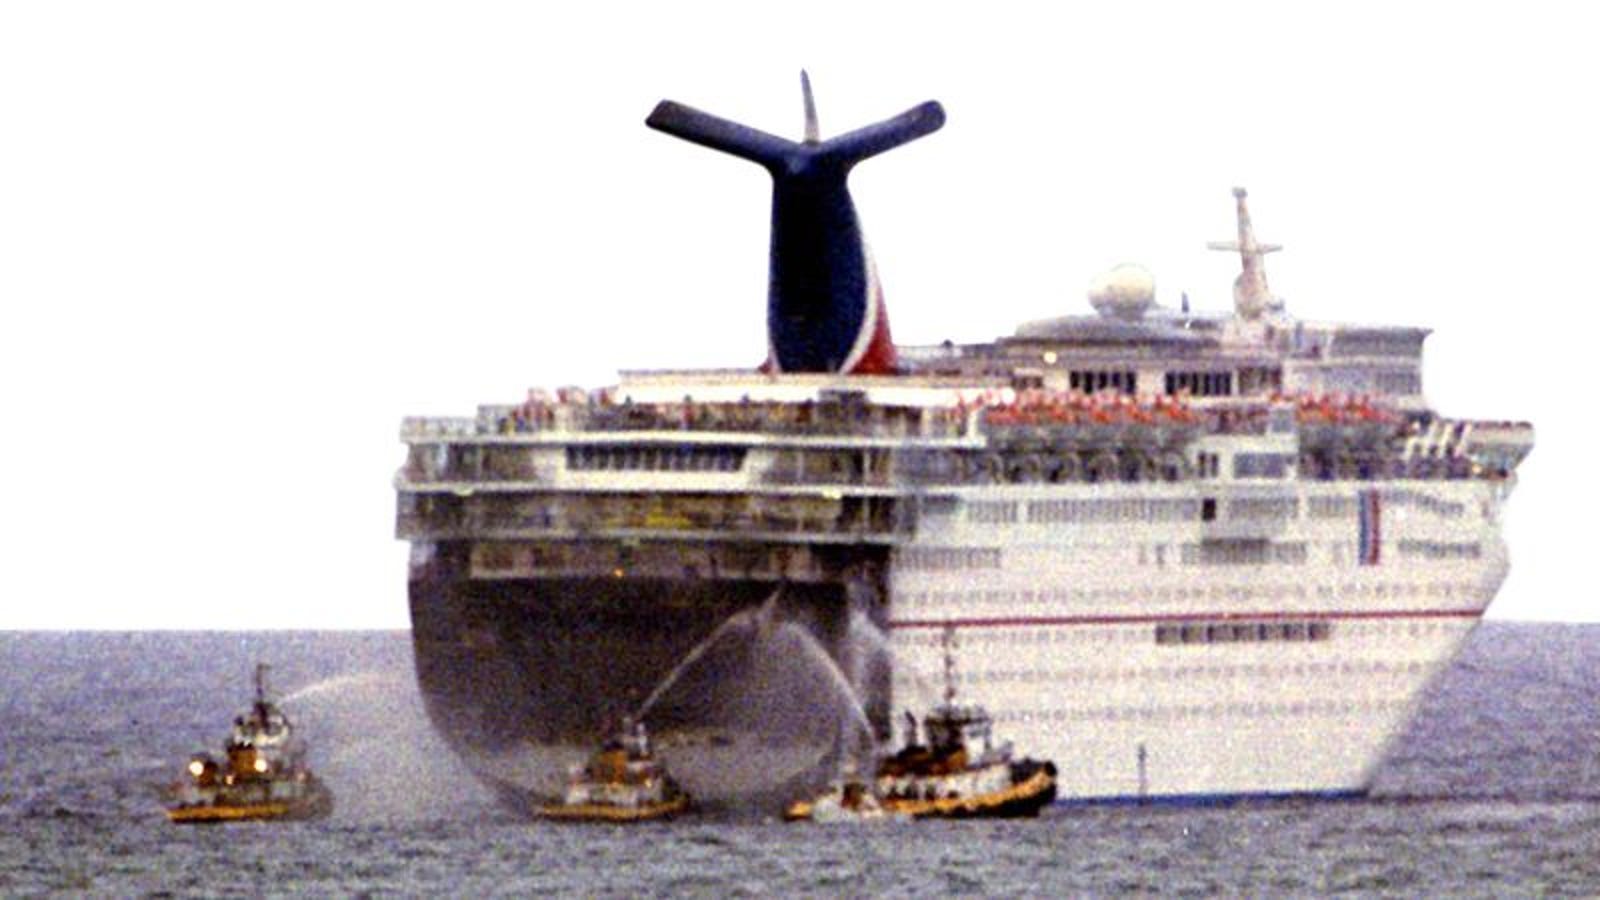 Major Carnival Cruise Line Disasters